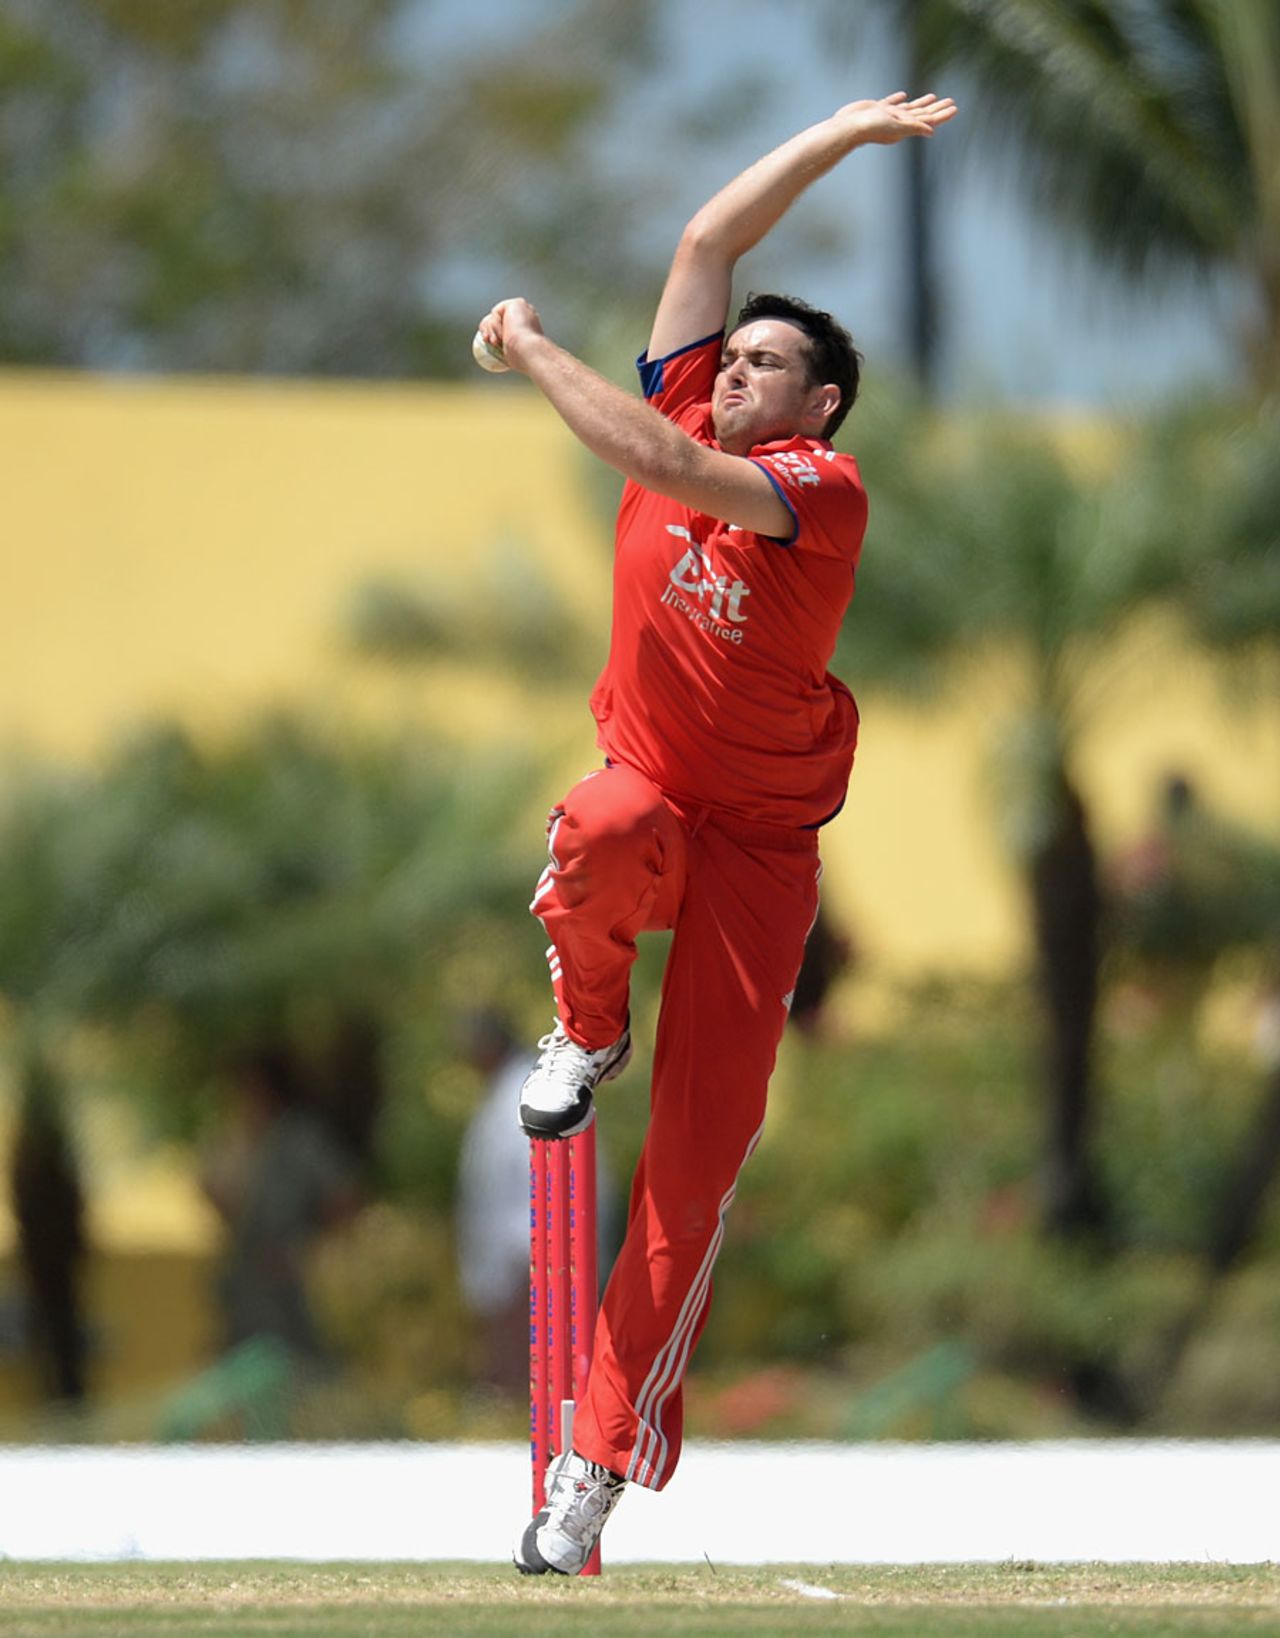 Stephen Parry gets through his action, West Indies v England, 2nd ODI, North Sound, March 2, 2014